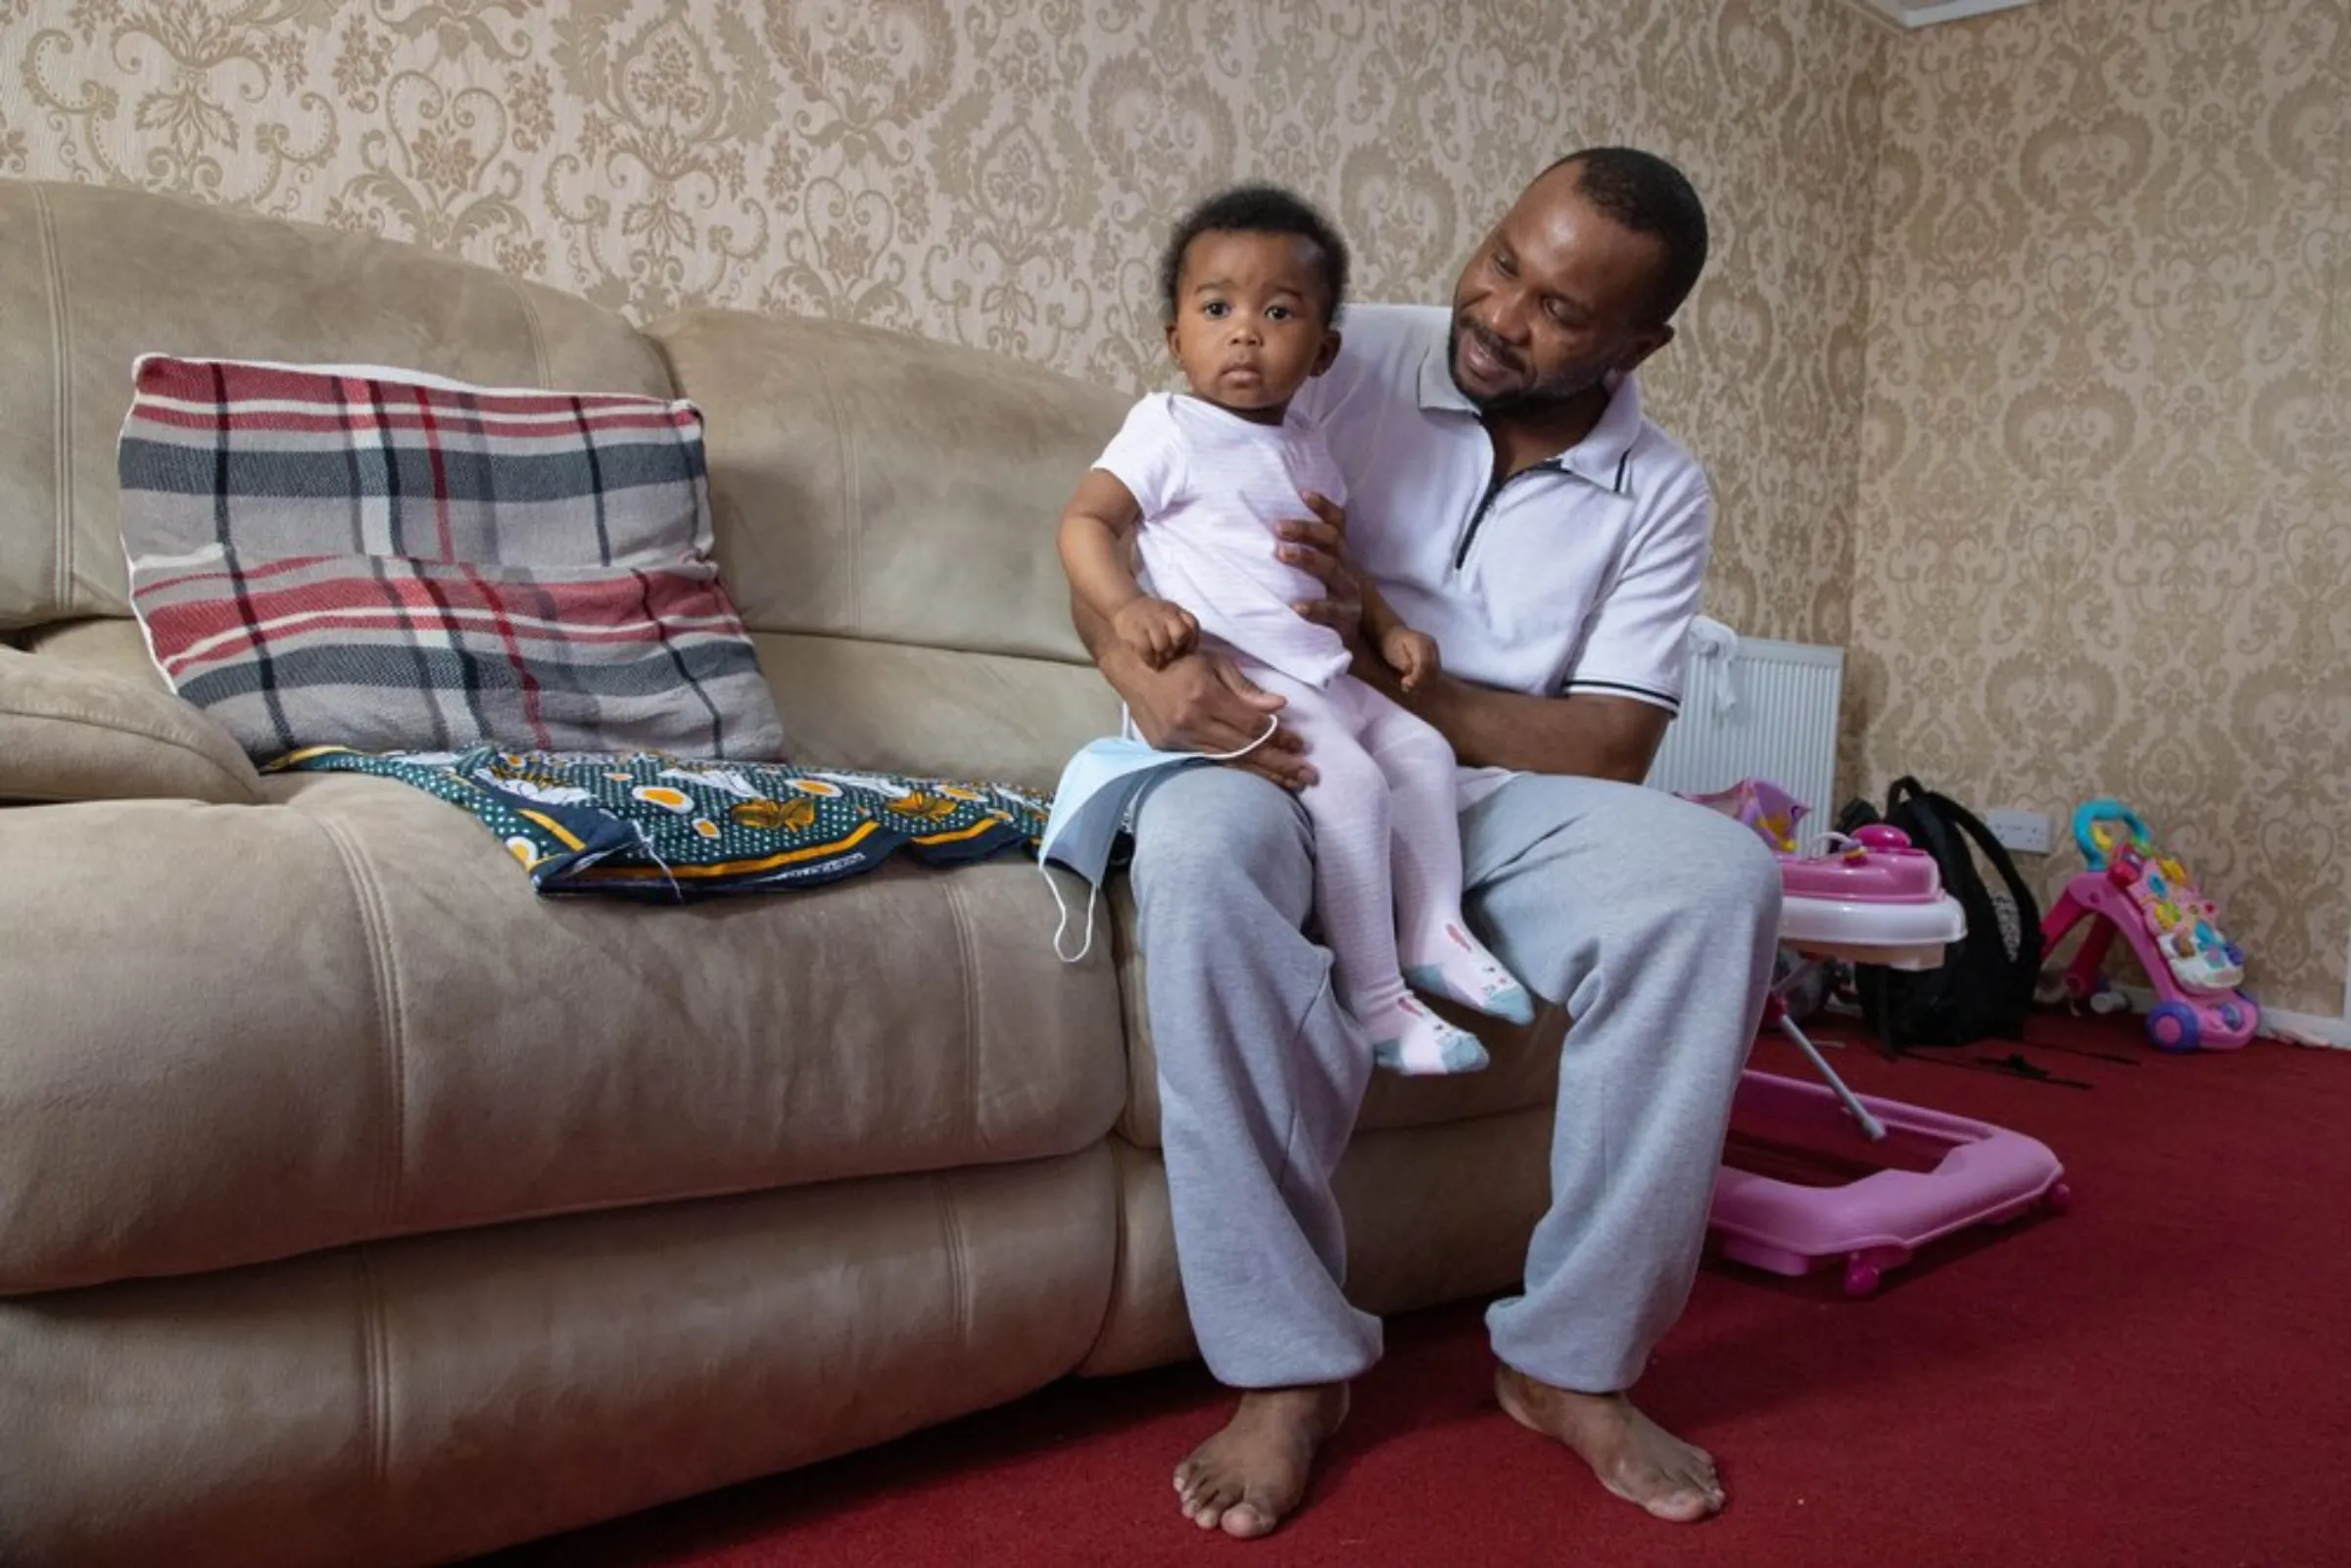 Tizo Seleman holds his baby daughter in his home in Glasgow, United Kingdom, July 22, 2021. Seleman and his partner expect their bills to shrink now that their social housing landlord has replaced old heaters with an air-source heat pump